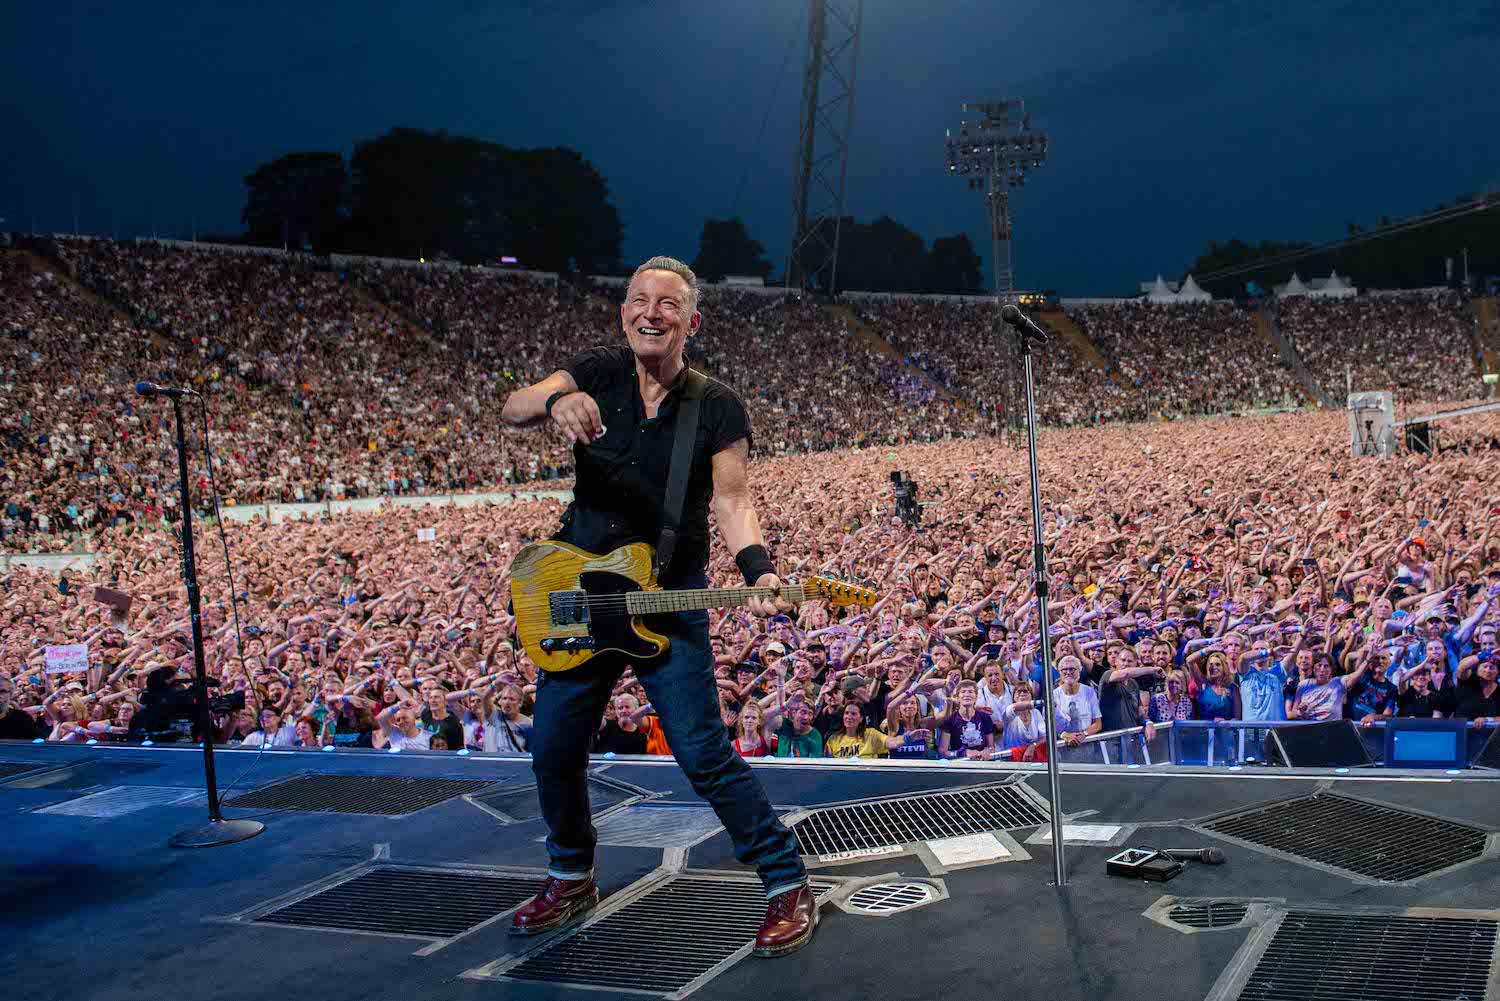 Bruce Springsteen & E Street Band at Olympiastadion, Munich, Germany on July 23, 2023.